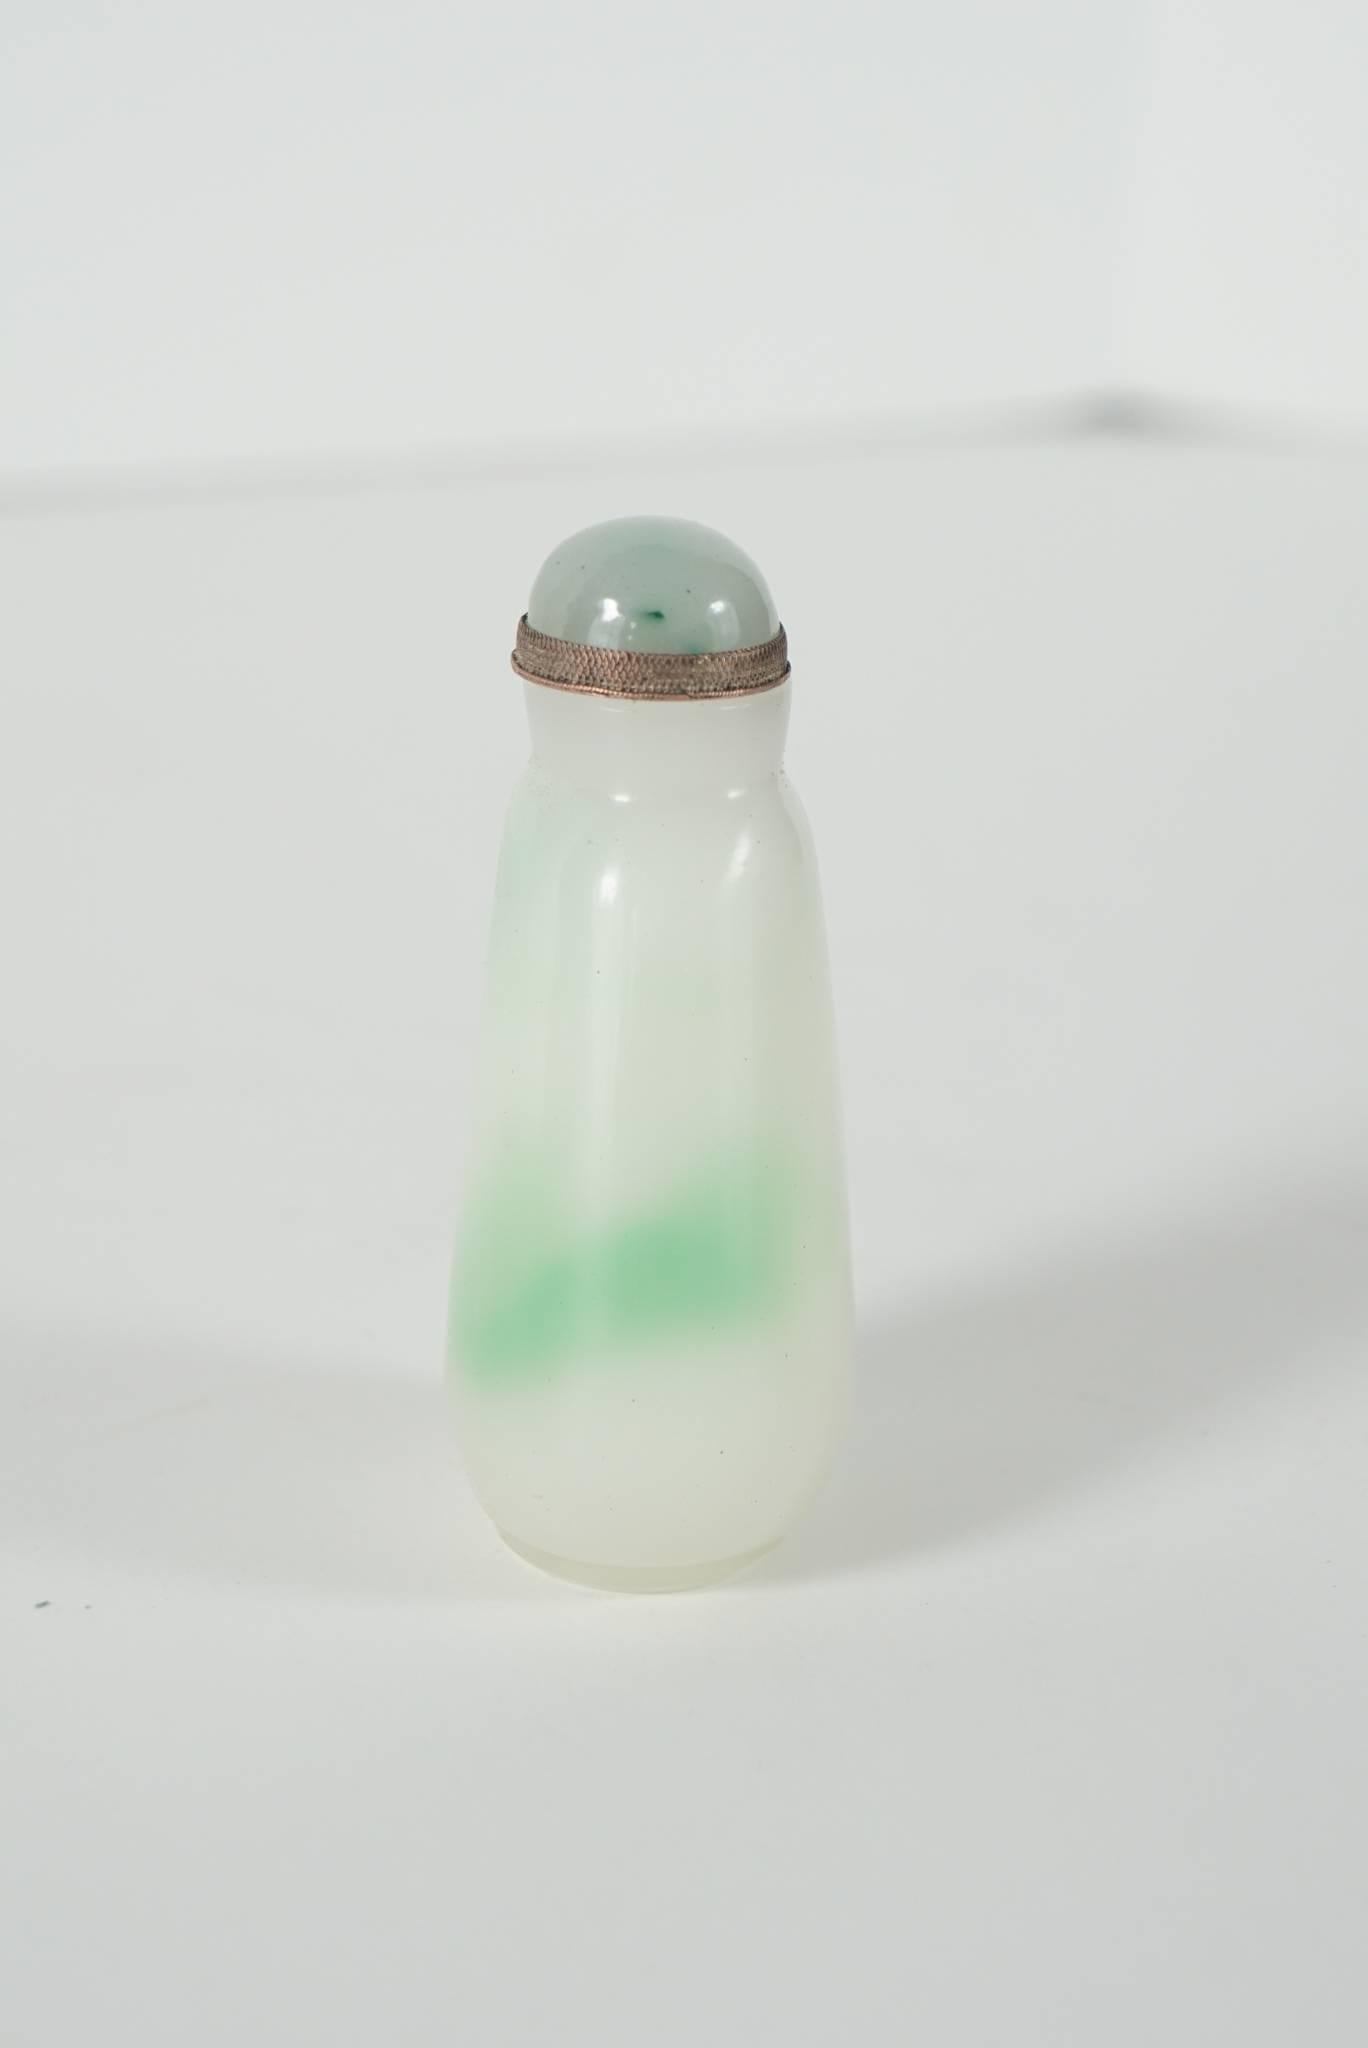 Chinese Jadeite Snuff Bottle from the Estate of C. Z. Guest